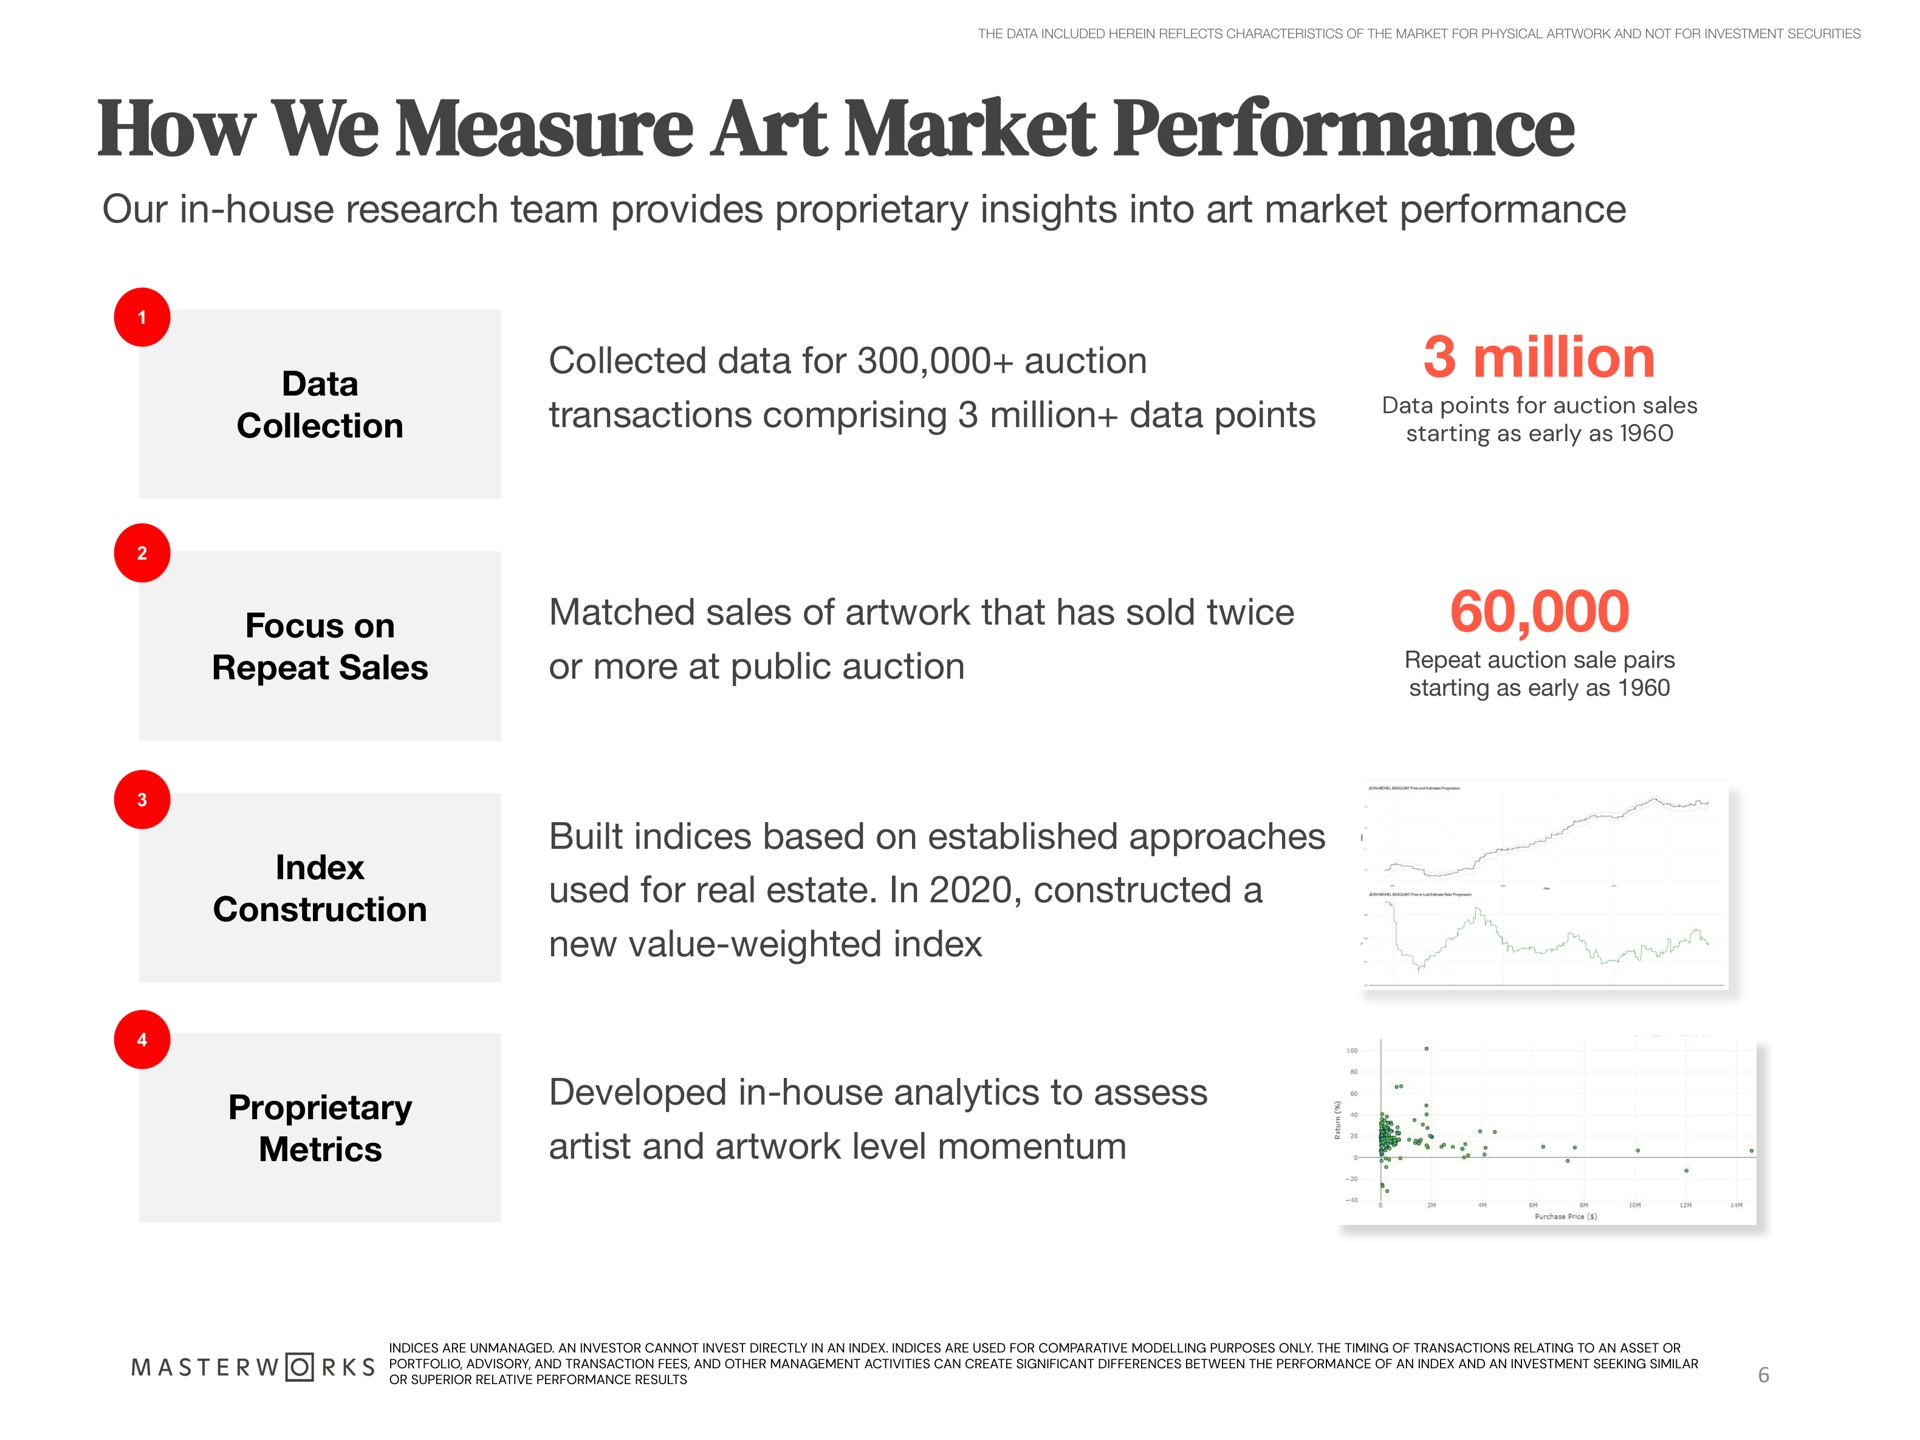 how we measure art market performance our in house research team provides proprietary insights into art market performance collected data for auction transactions comprising million data points million matched sales of that has sold twice or more at public auction built indices based on established approaches used for real estate in constructed a new value weighted index developed in house analytics to assess artist and level momentum | Masterworks